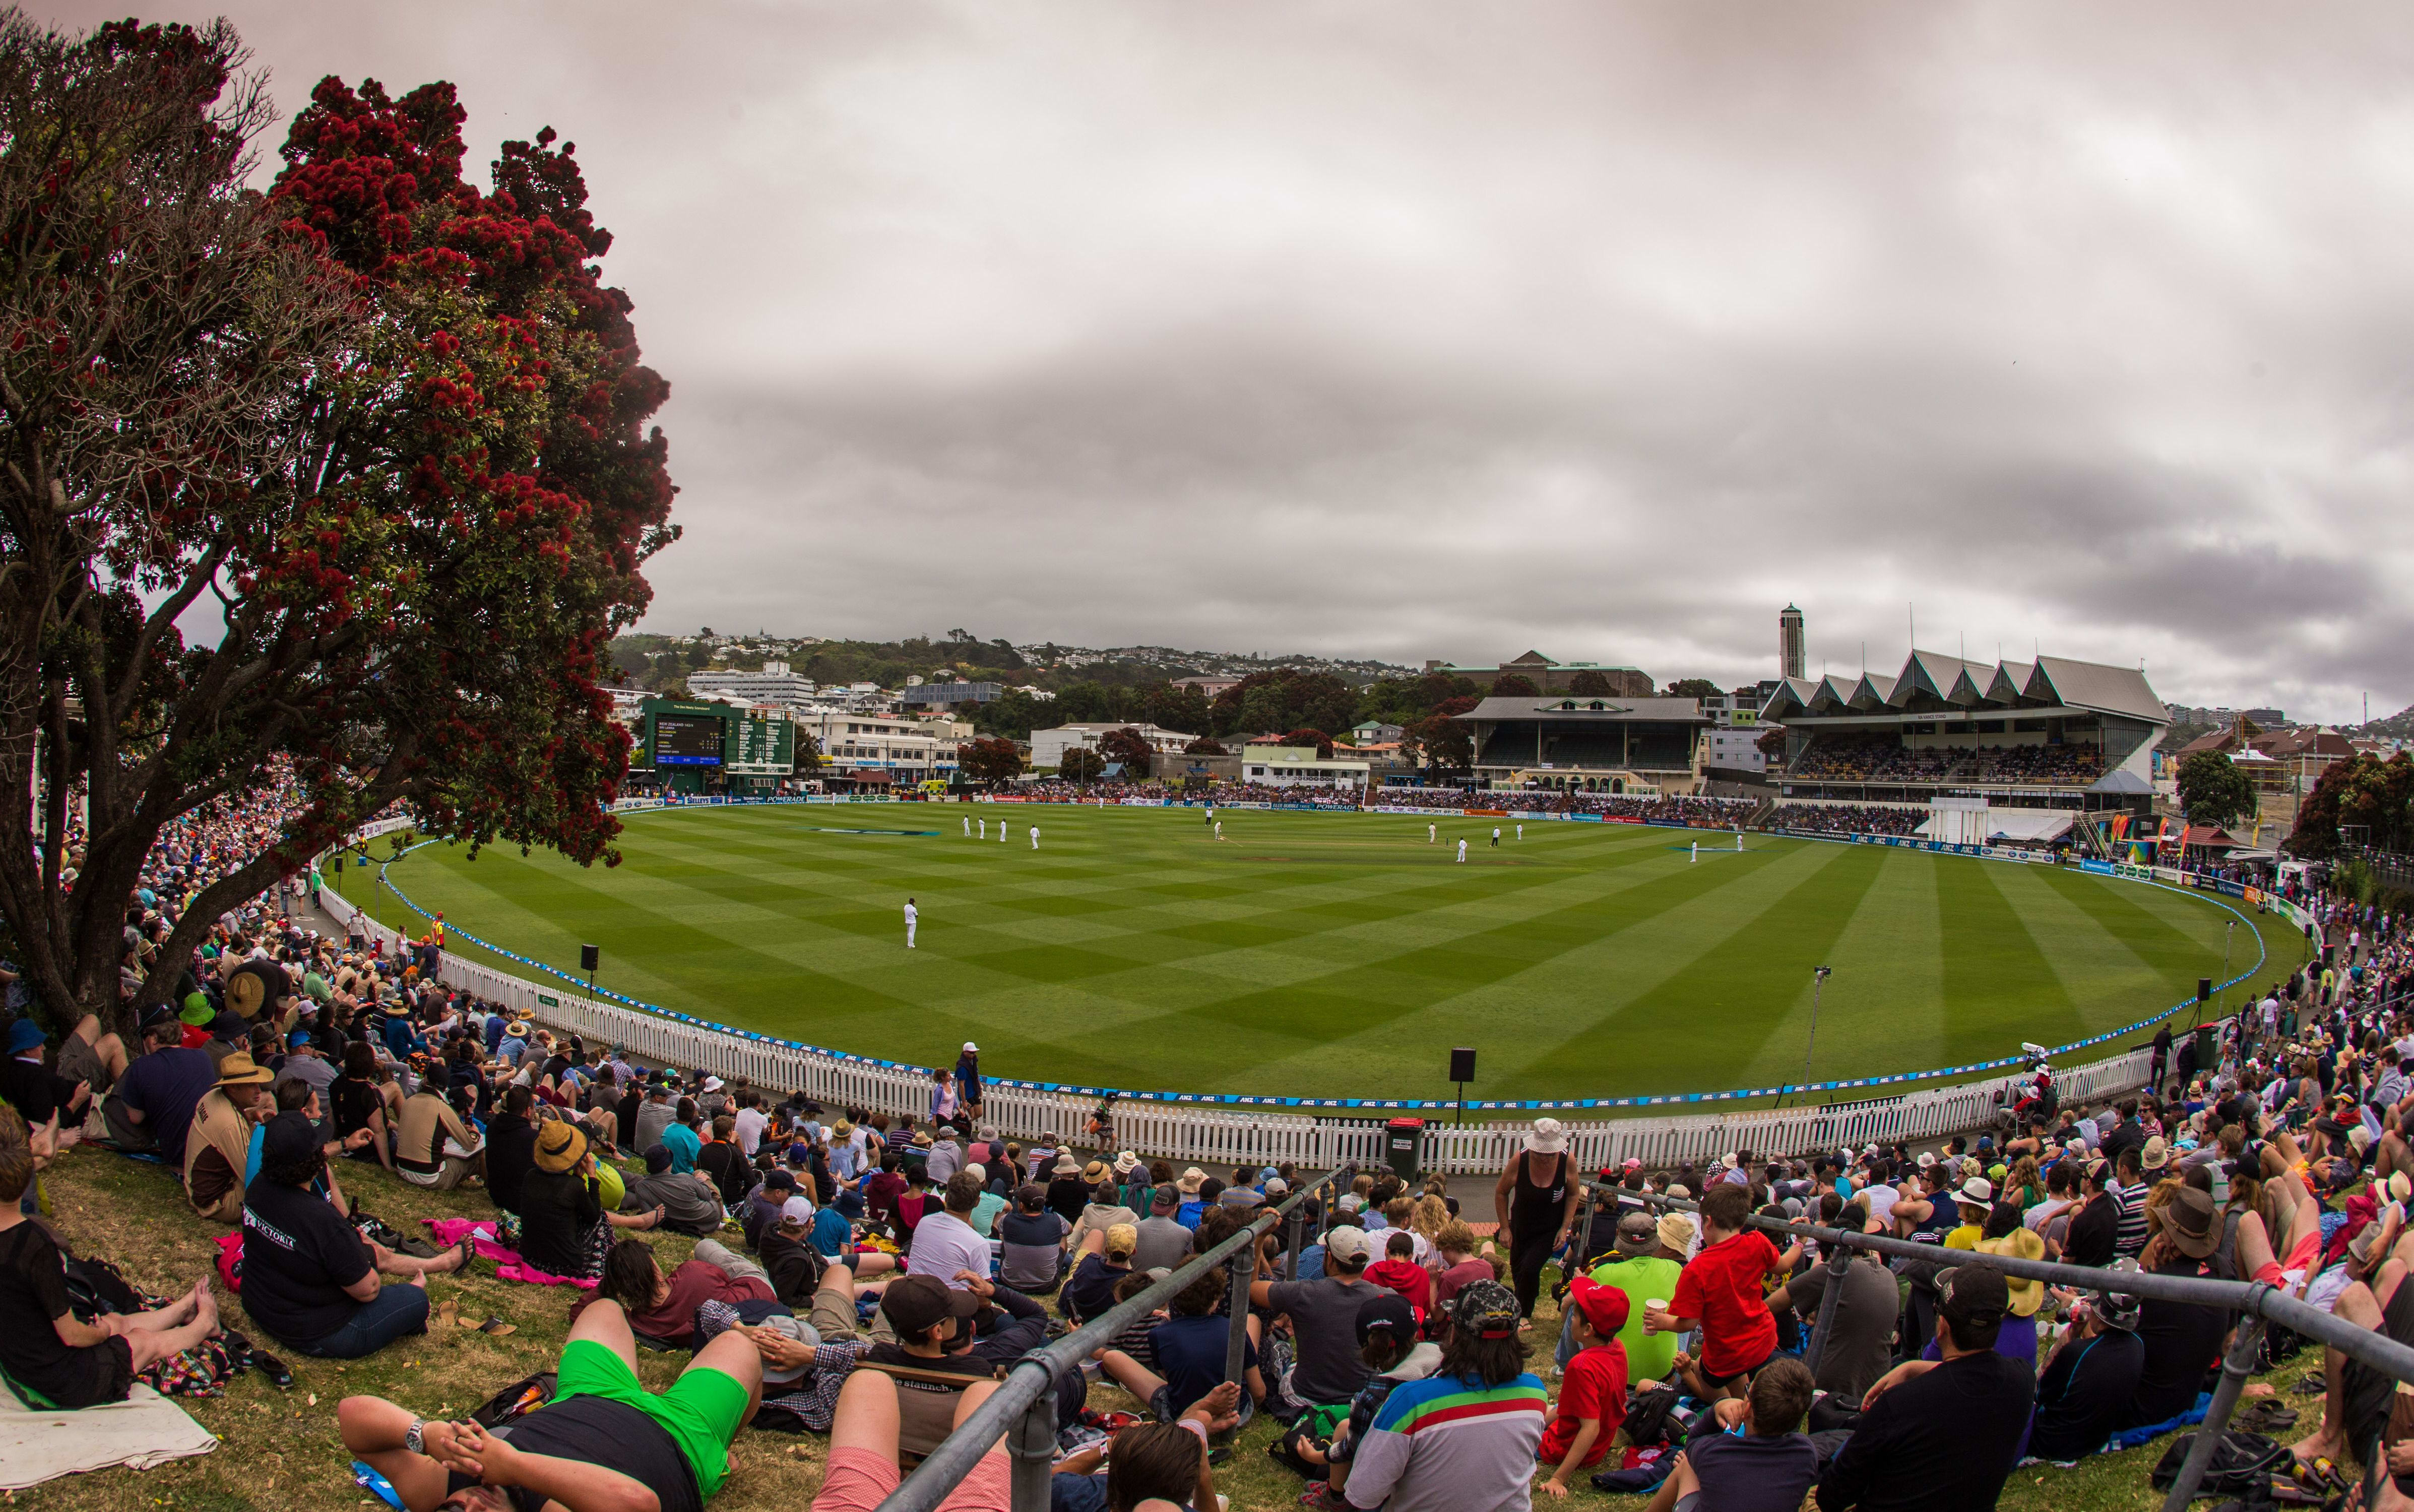 A good crowd at the Basin Reserve